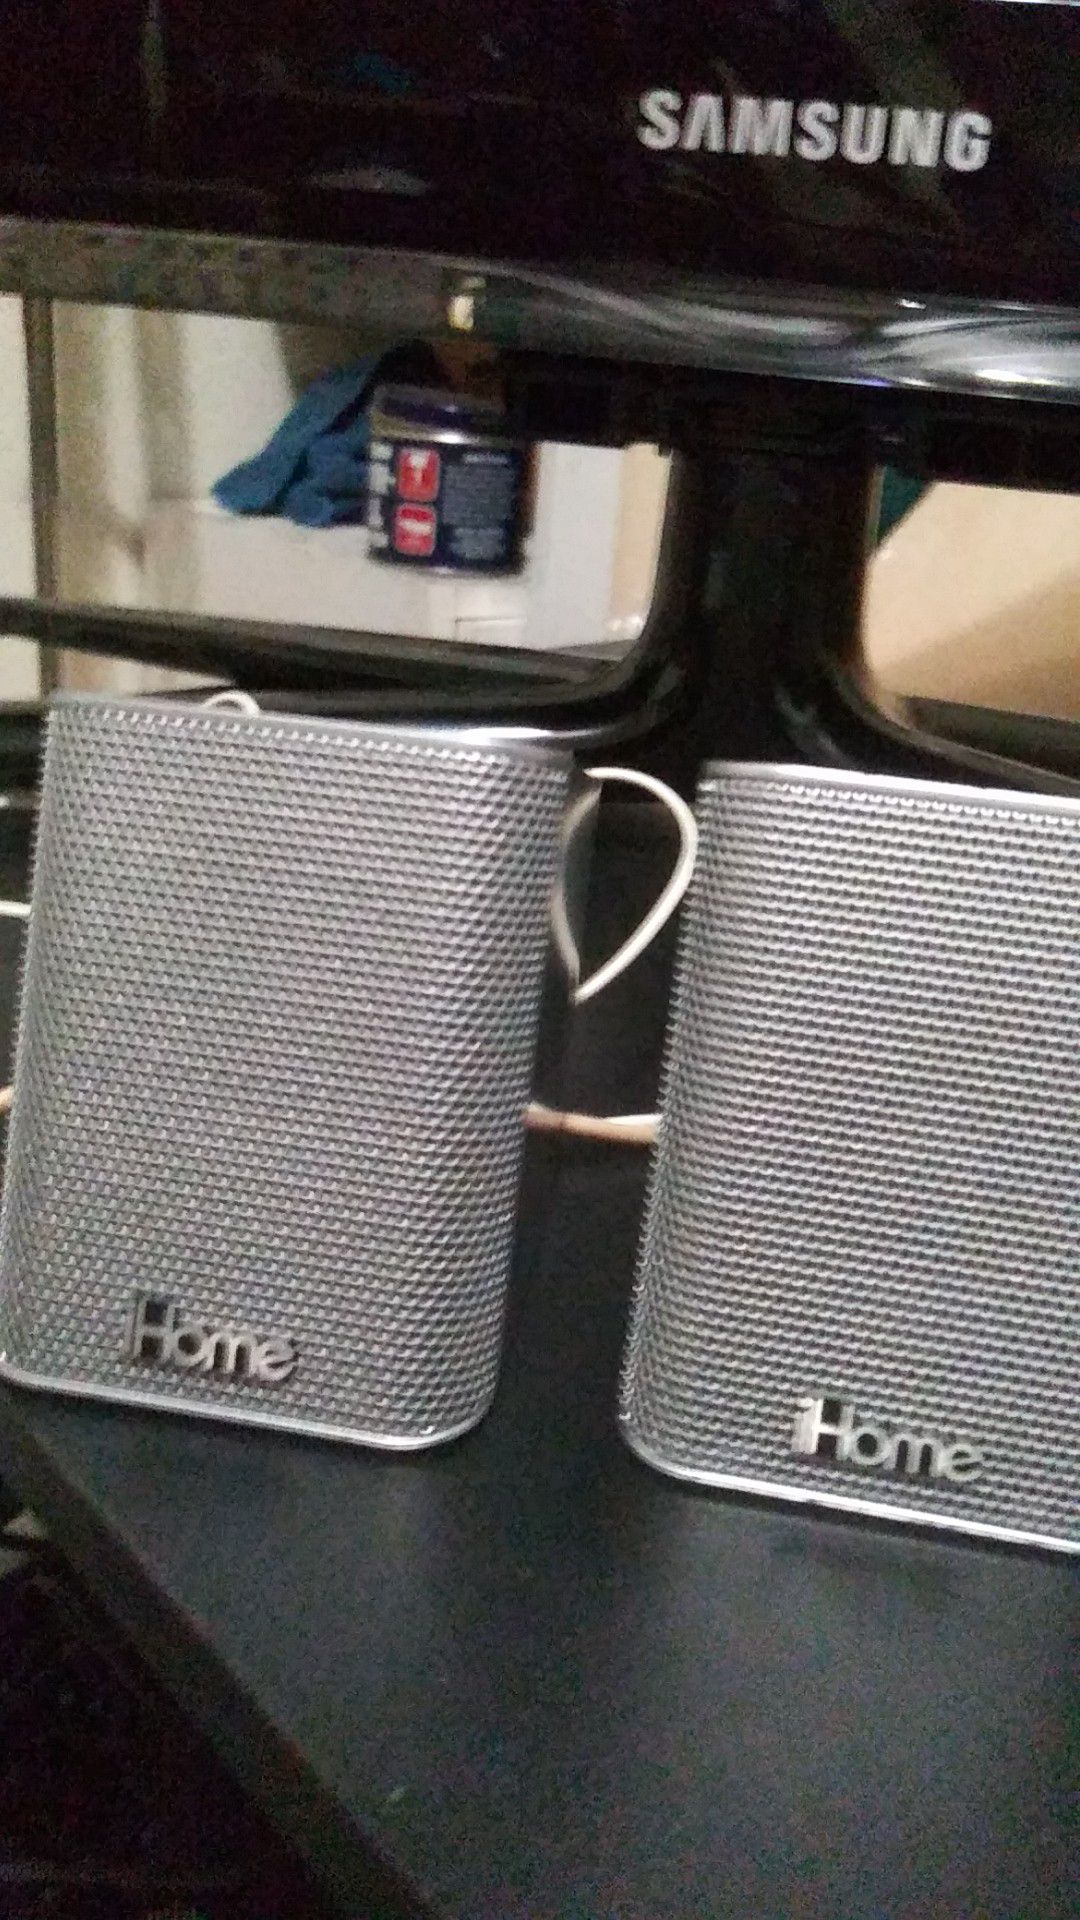 I home Bluetooth mini bass boosted speakers